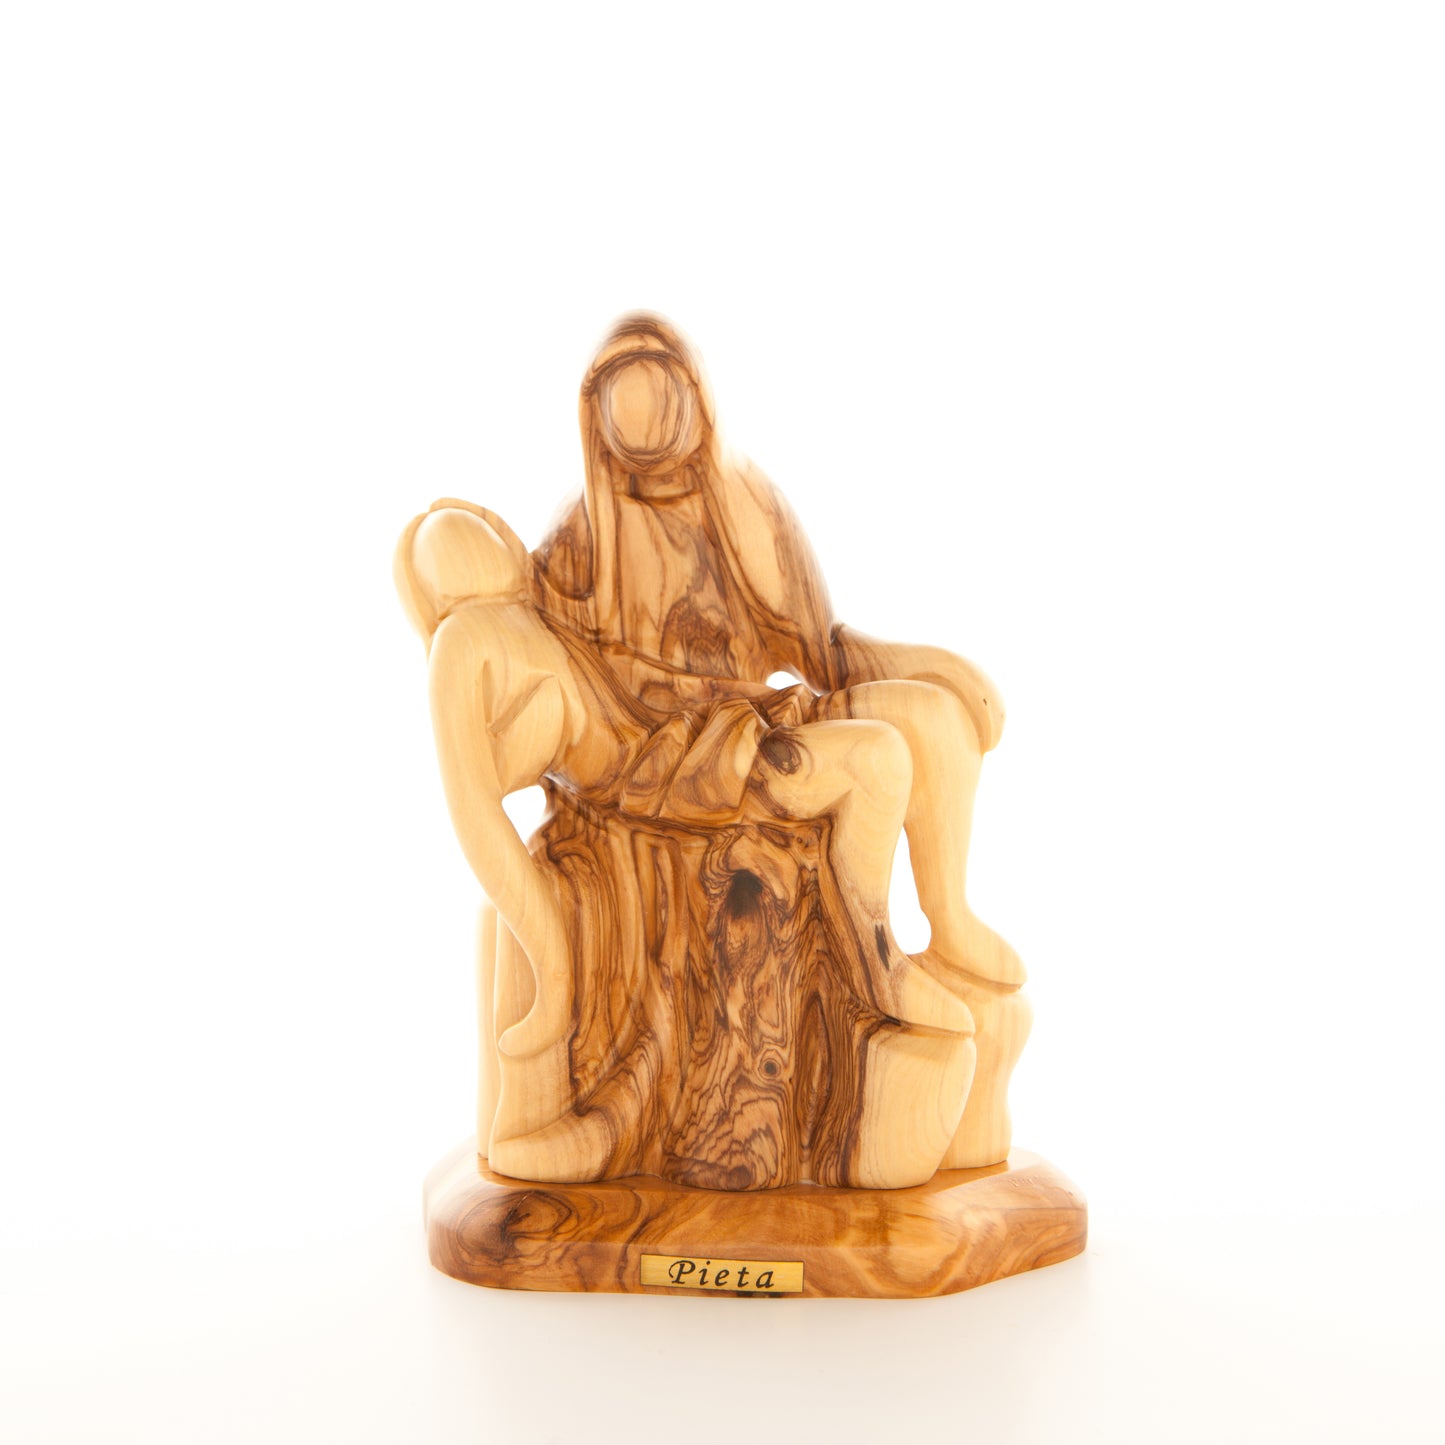 Pieta Figurine (Abstract), 7.1" Olive Wood Carving Statue from Bethlehem